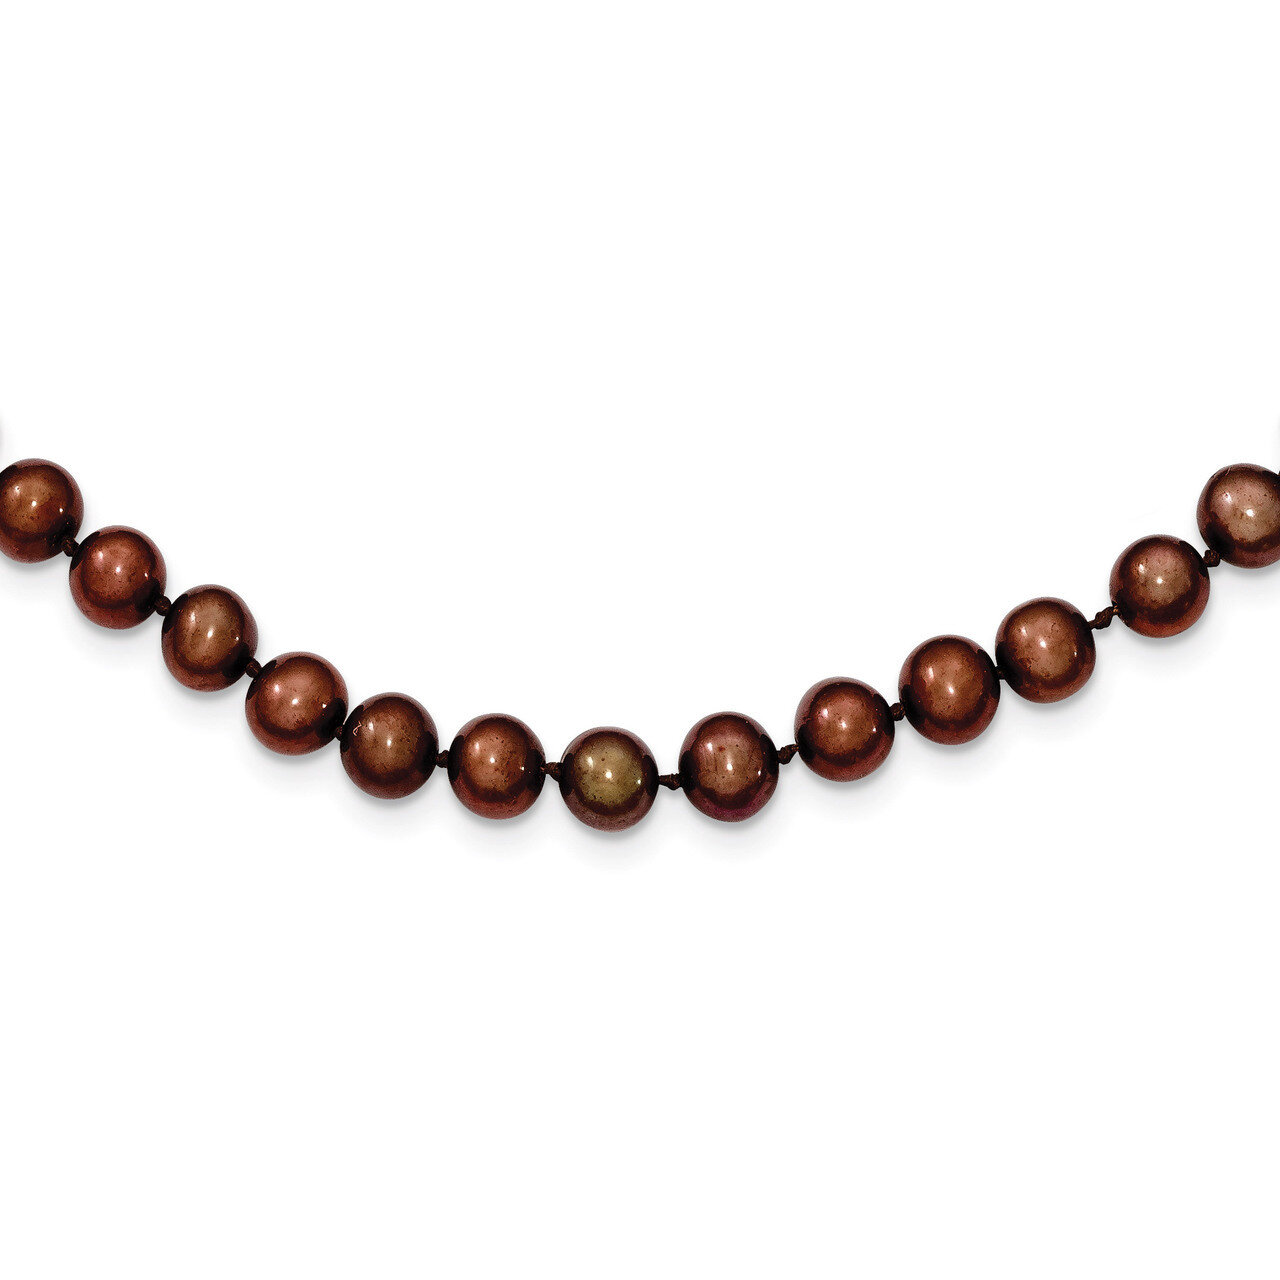 6-7mm Brown Cultured Pearl Necklace Sterling Silver QH4817-16